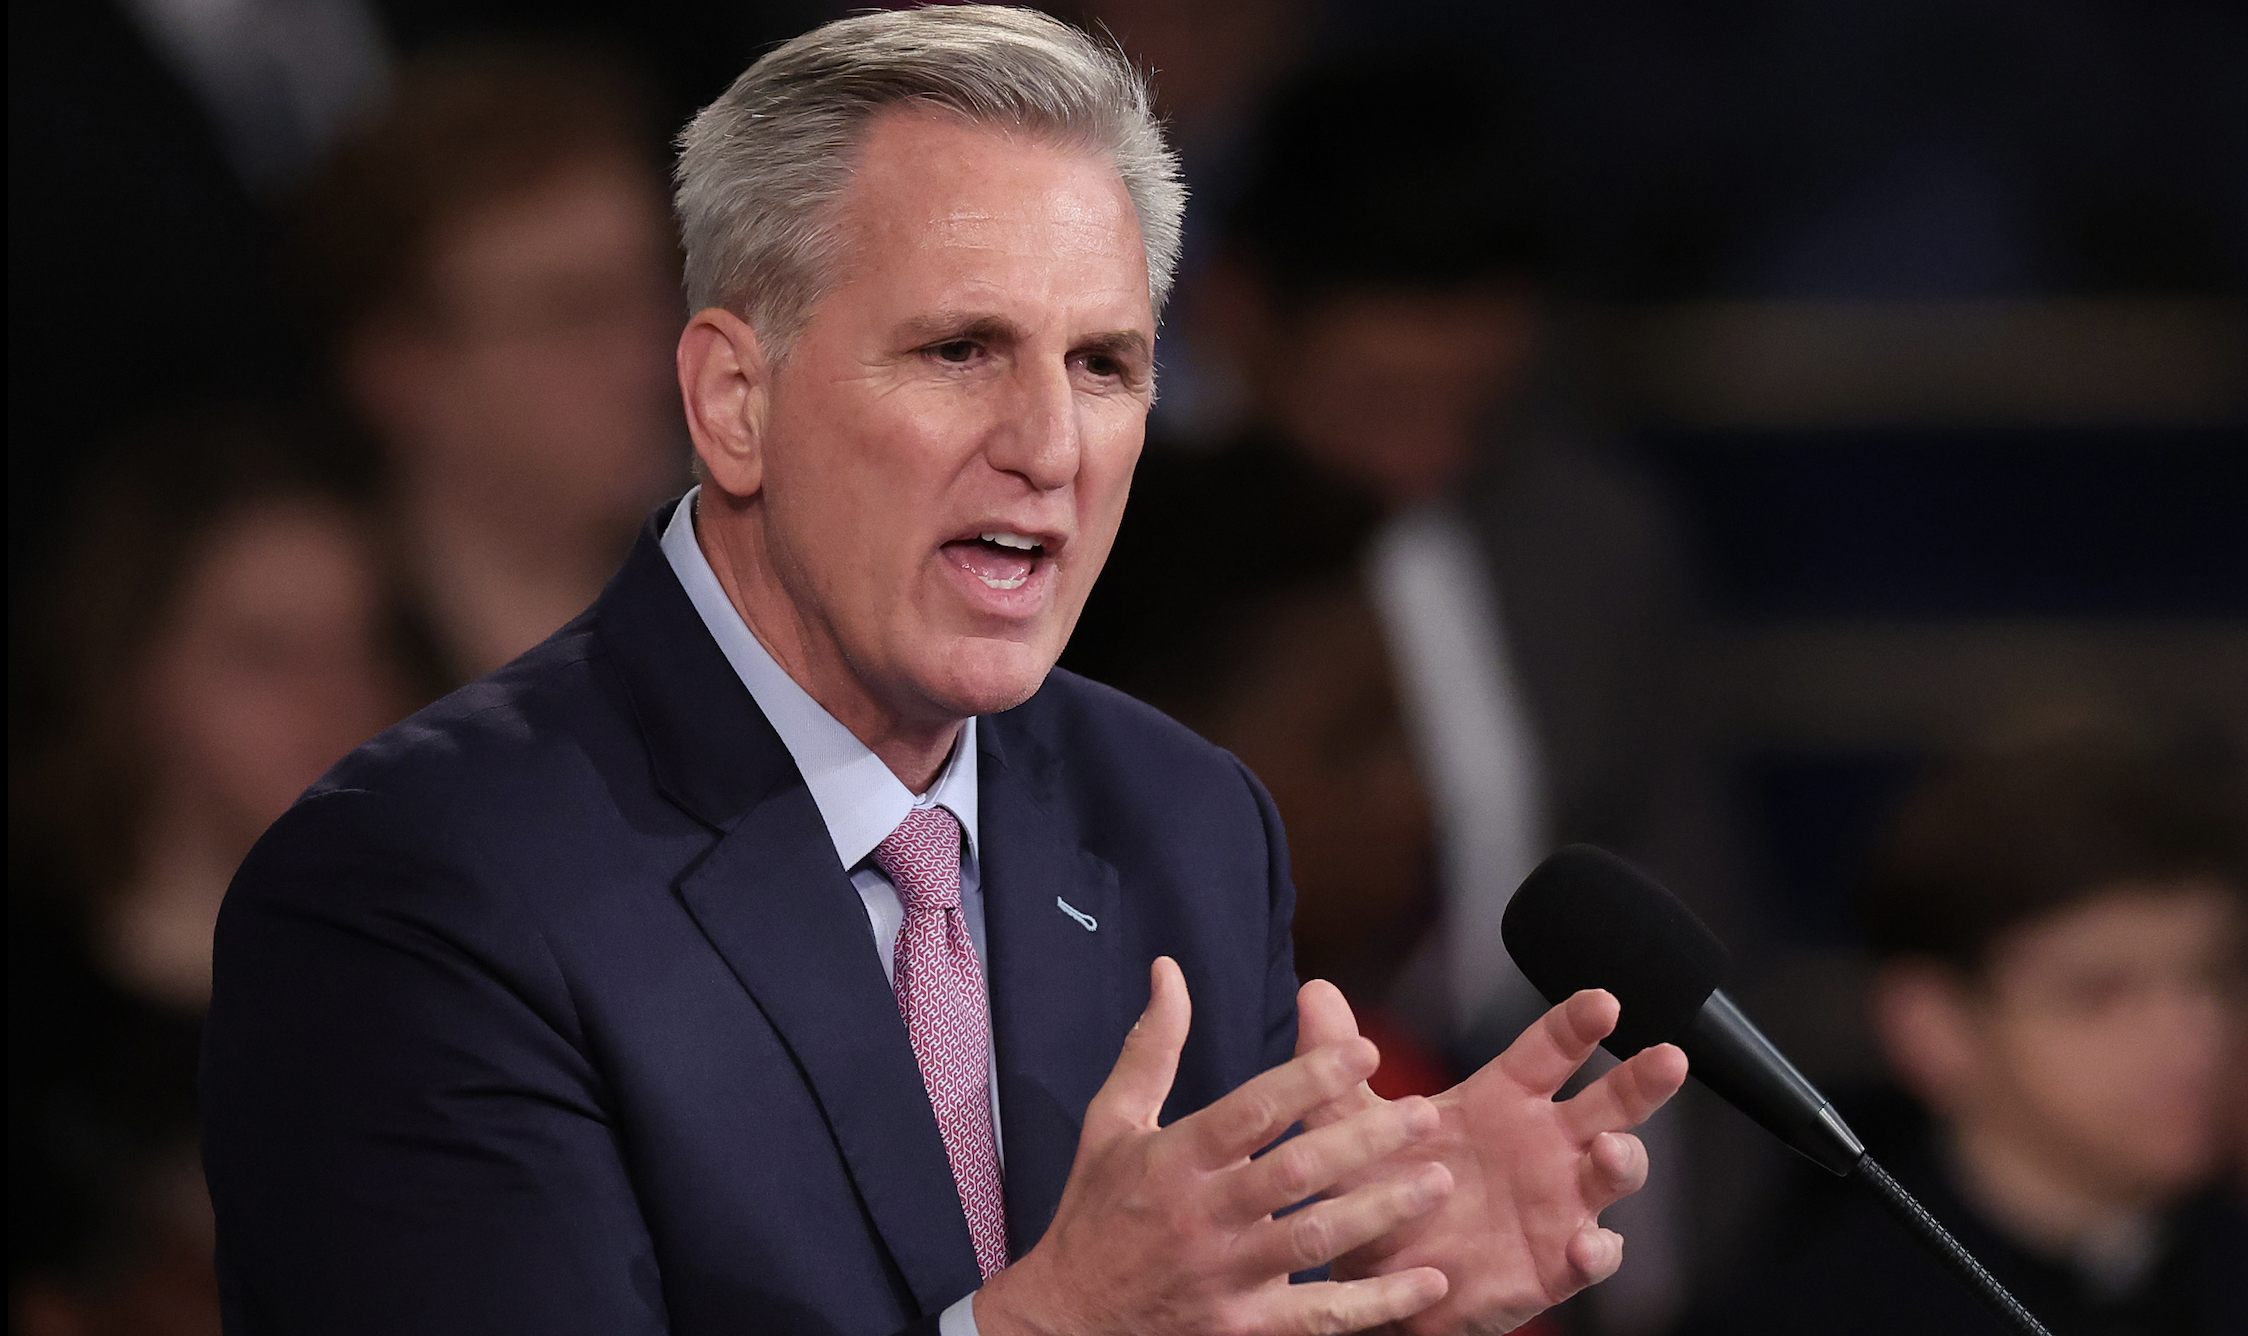 McCarthy ignores Freedom Caucus letter on spending reforms.